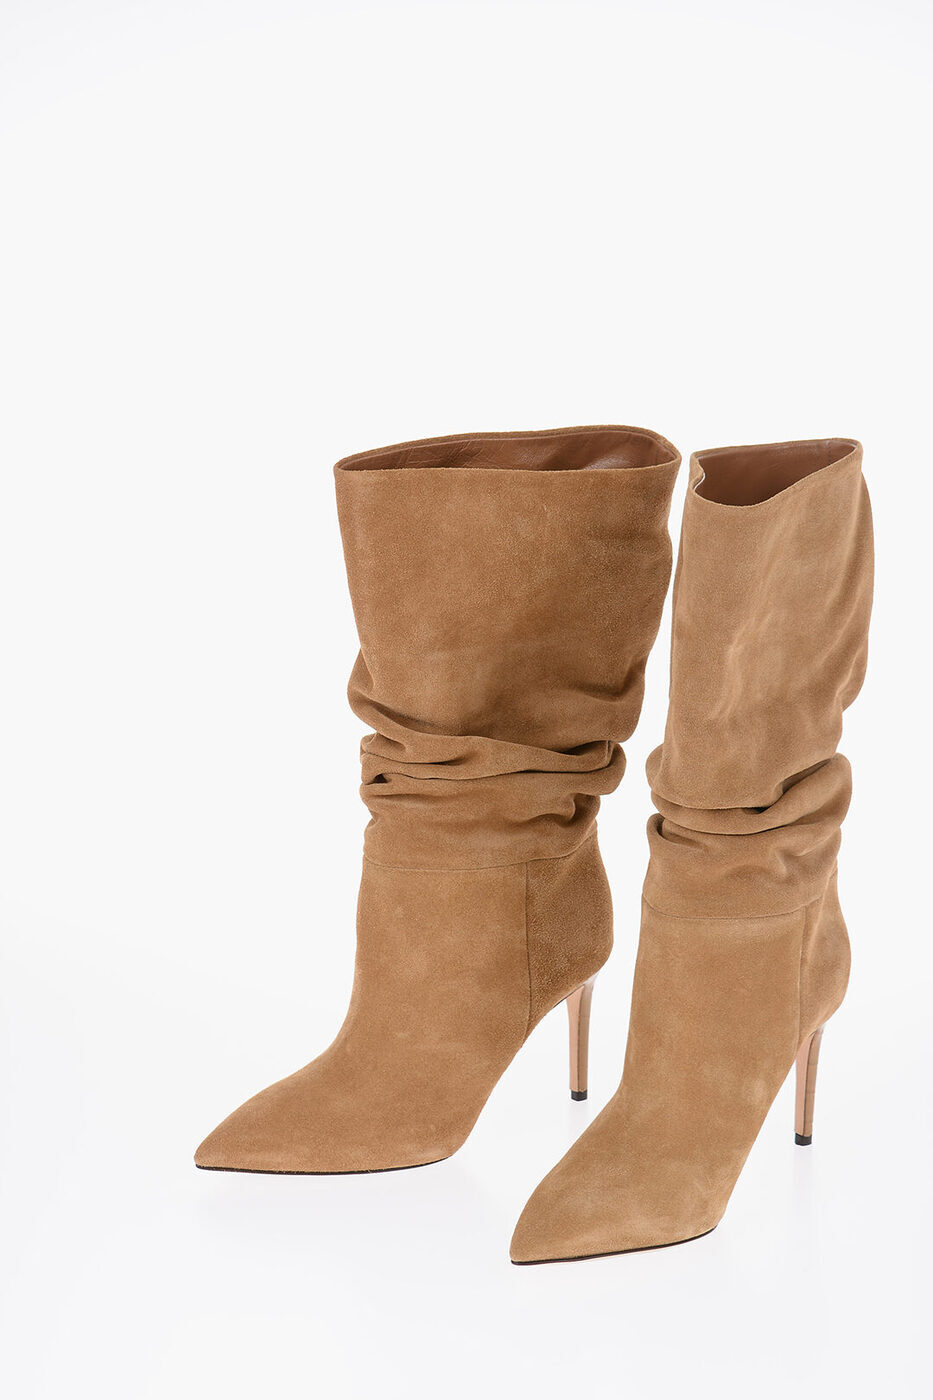 PARIS TEXAS パリ テキサス ブーツ PX703 XV003 CARAMEL レディース SUEDE HEELED ANKLE BOOTS WITH GATHERED DETAIL 【関税・送料無料】【ラッピング無料】 dk